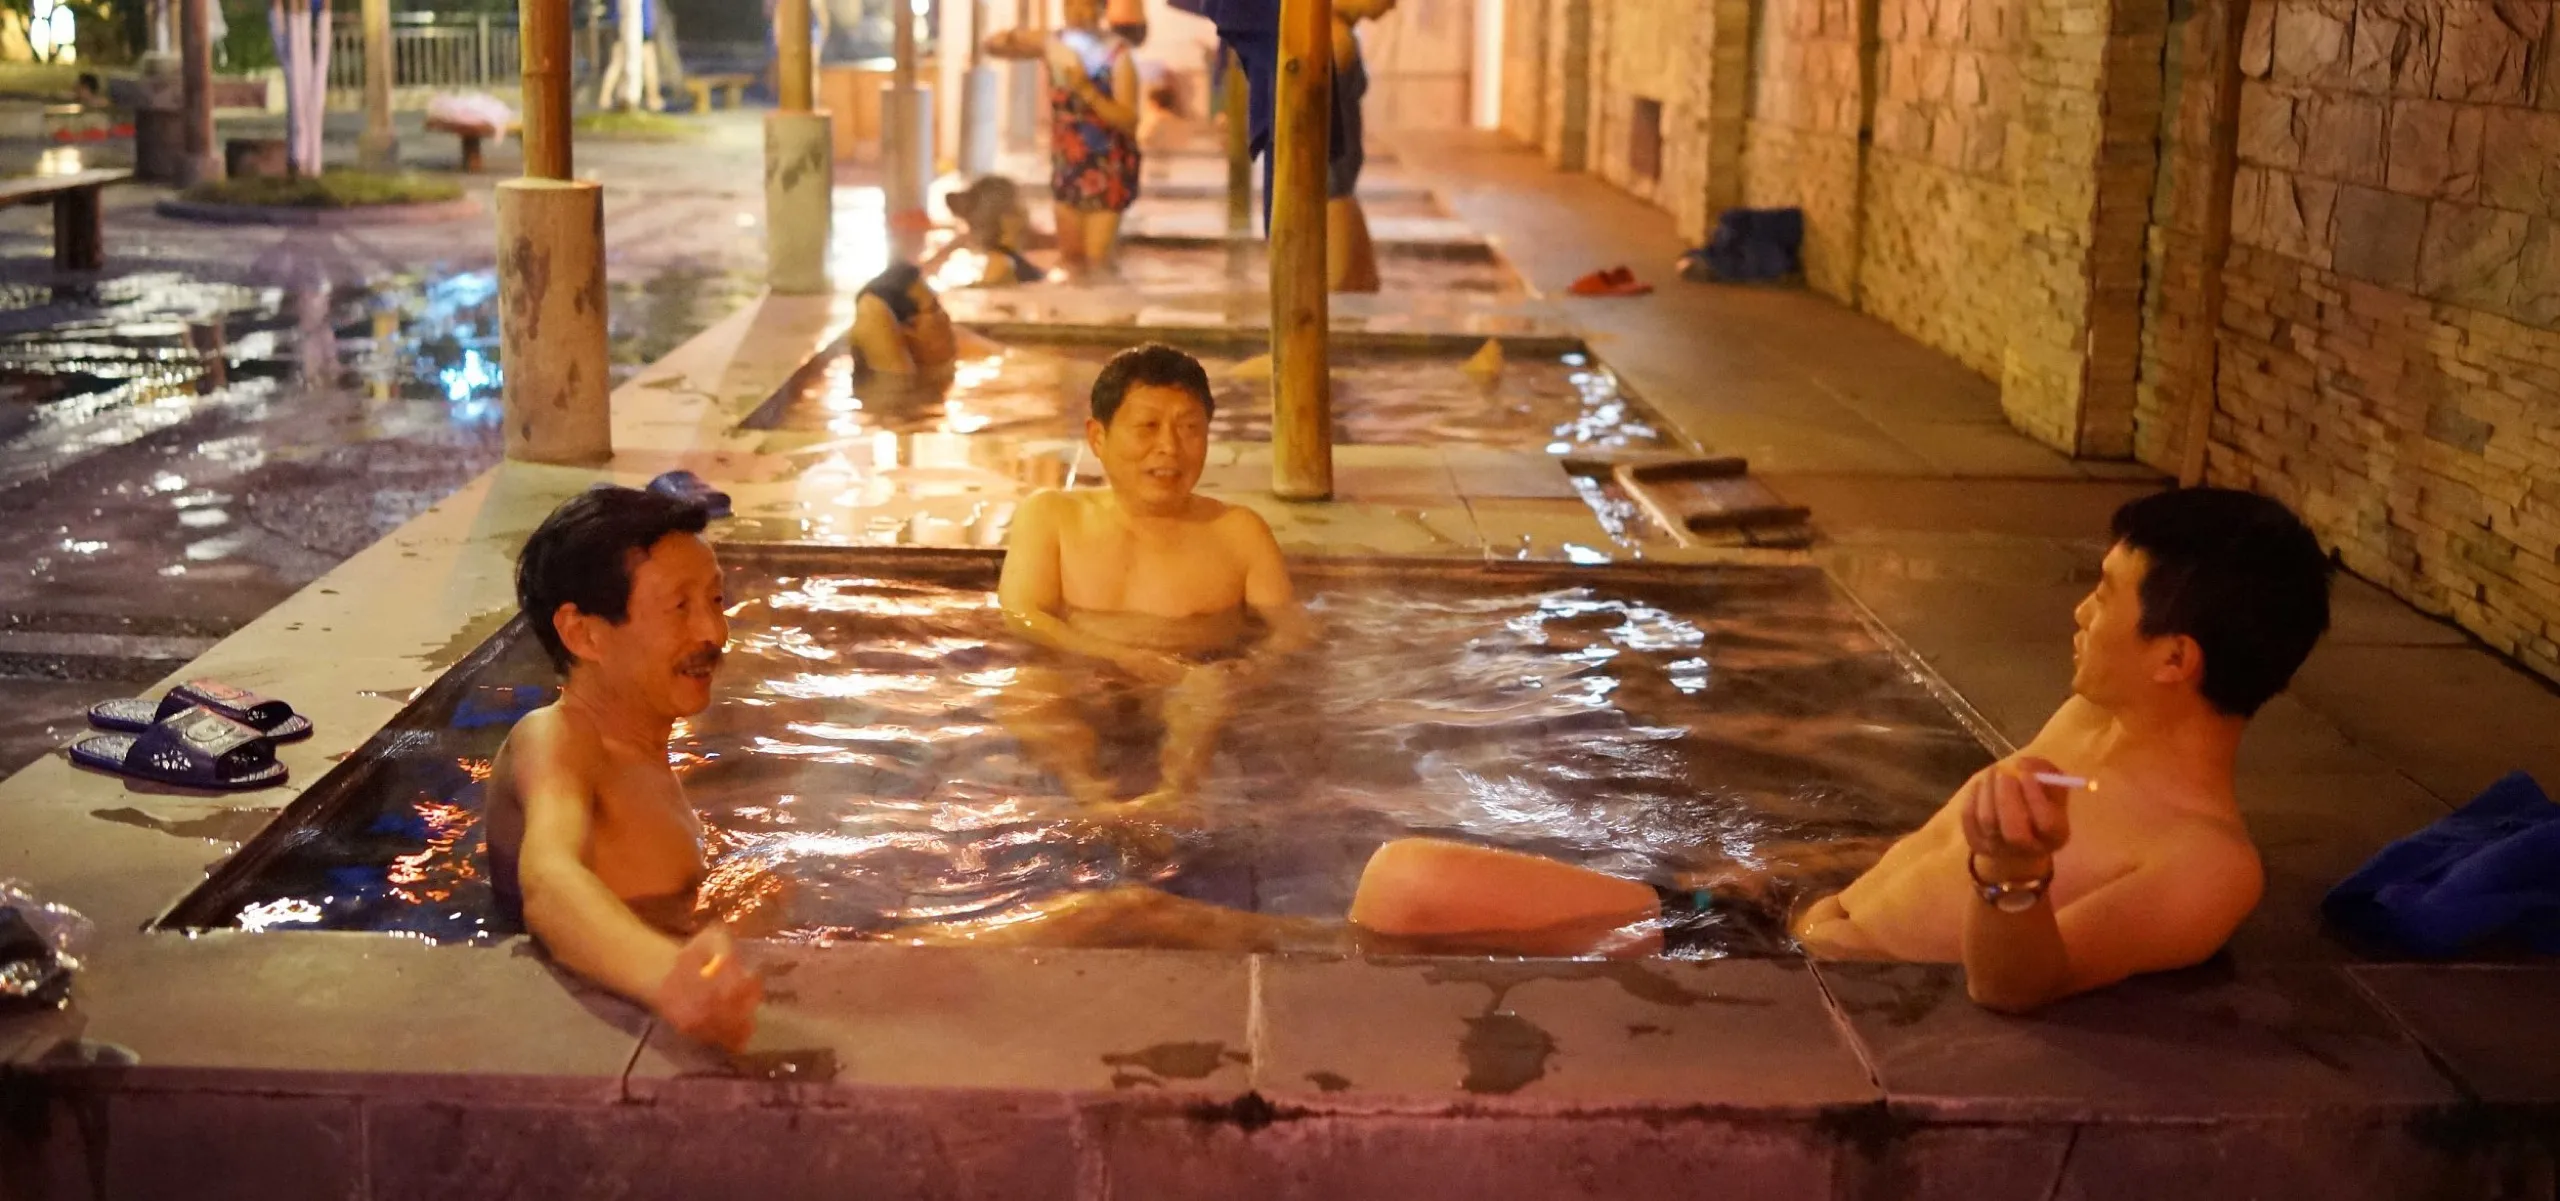 Chinese men in bathhouse